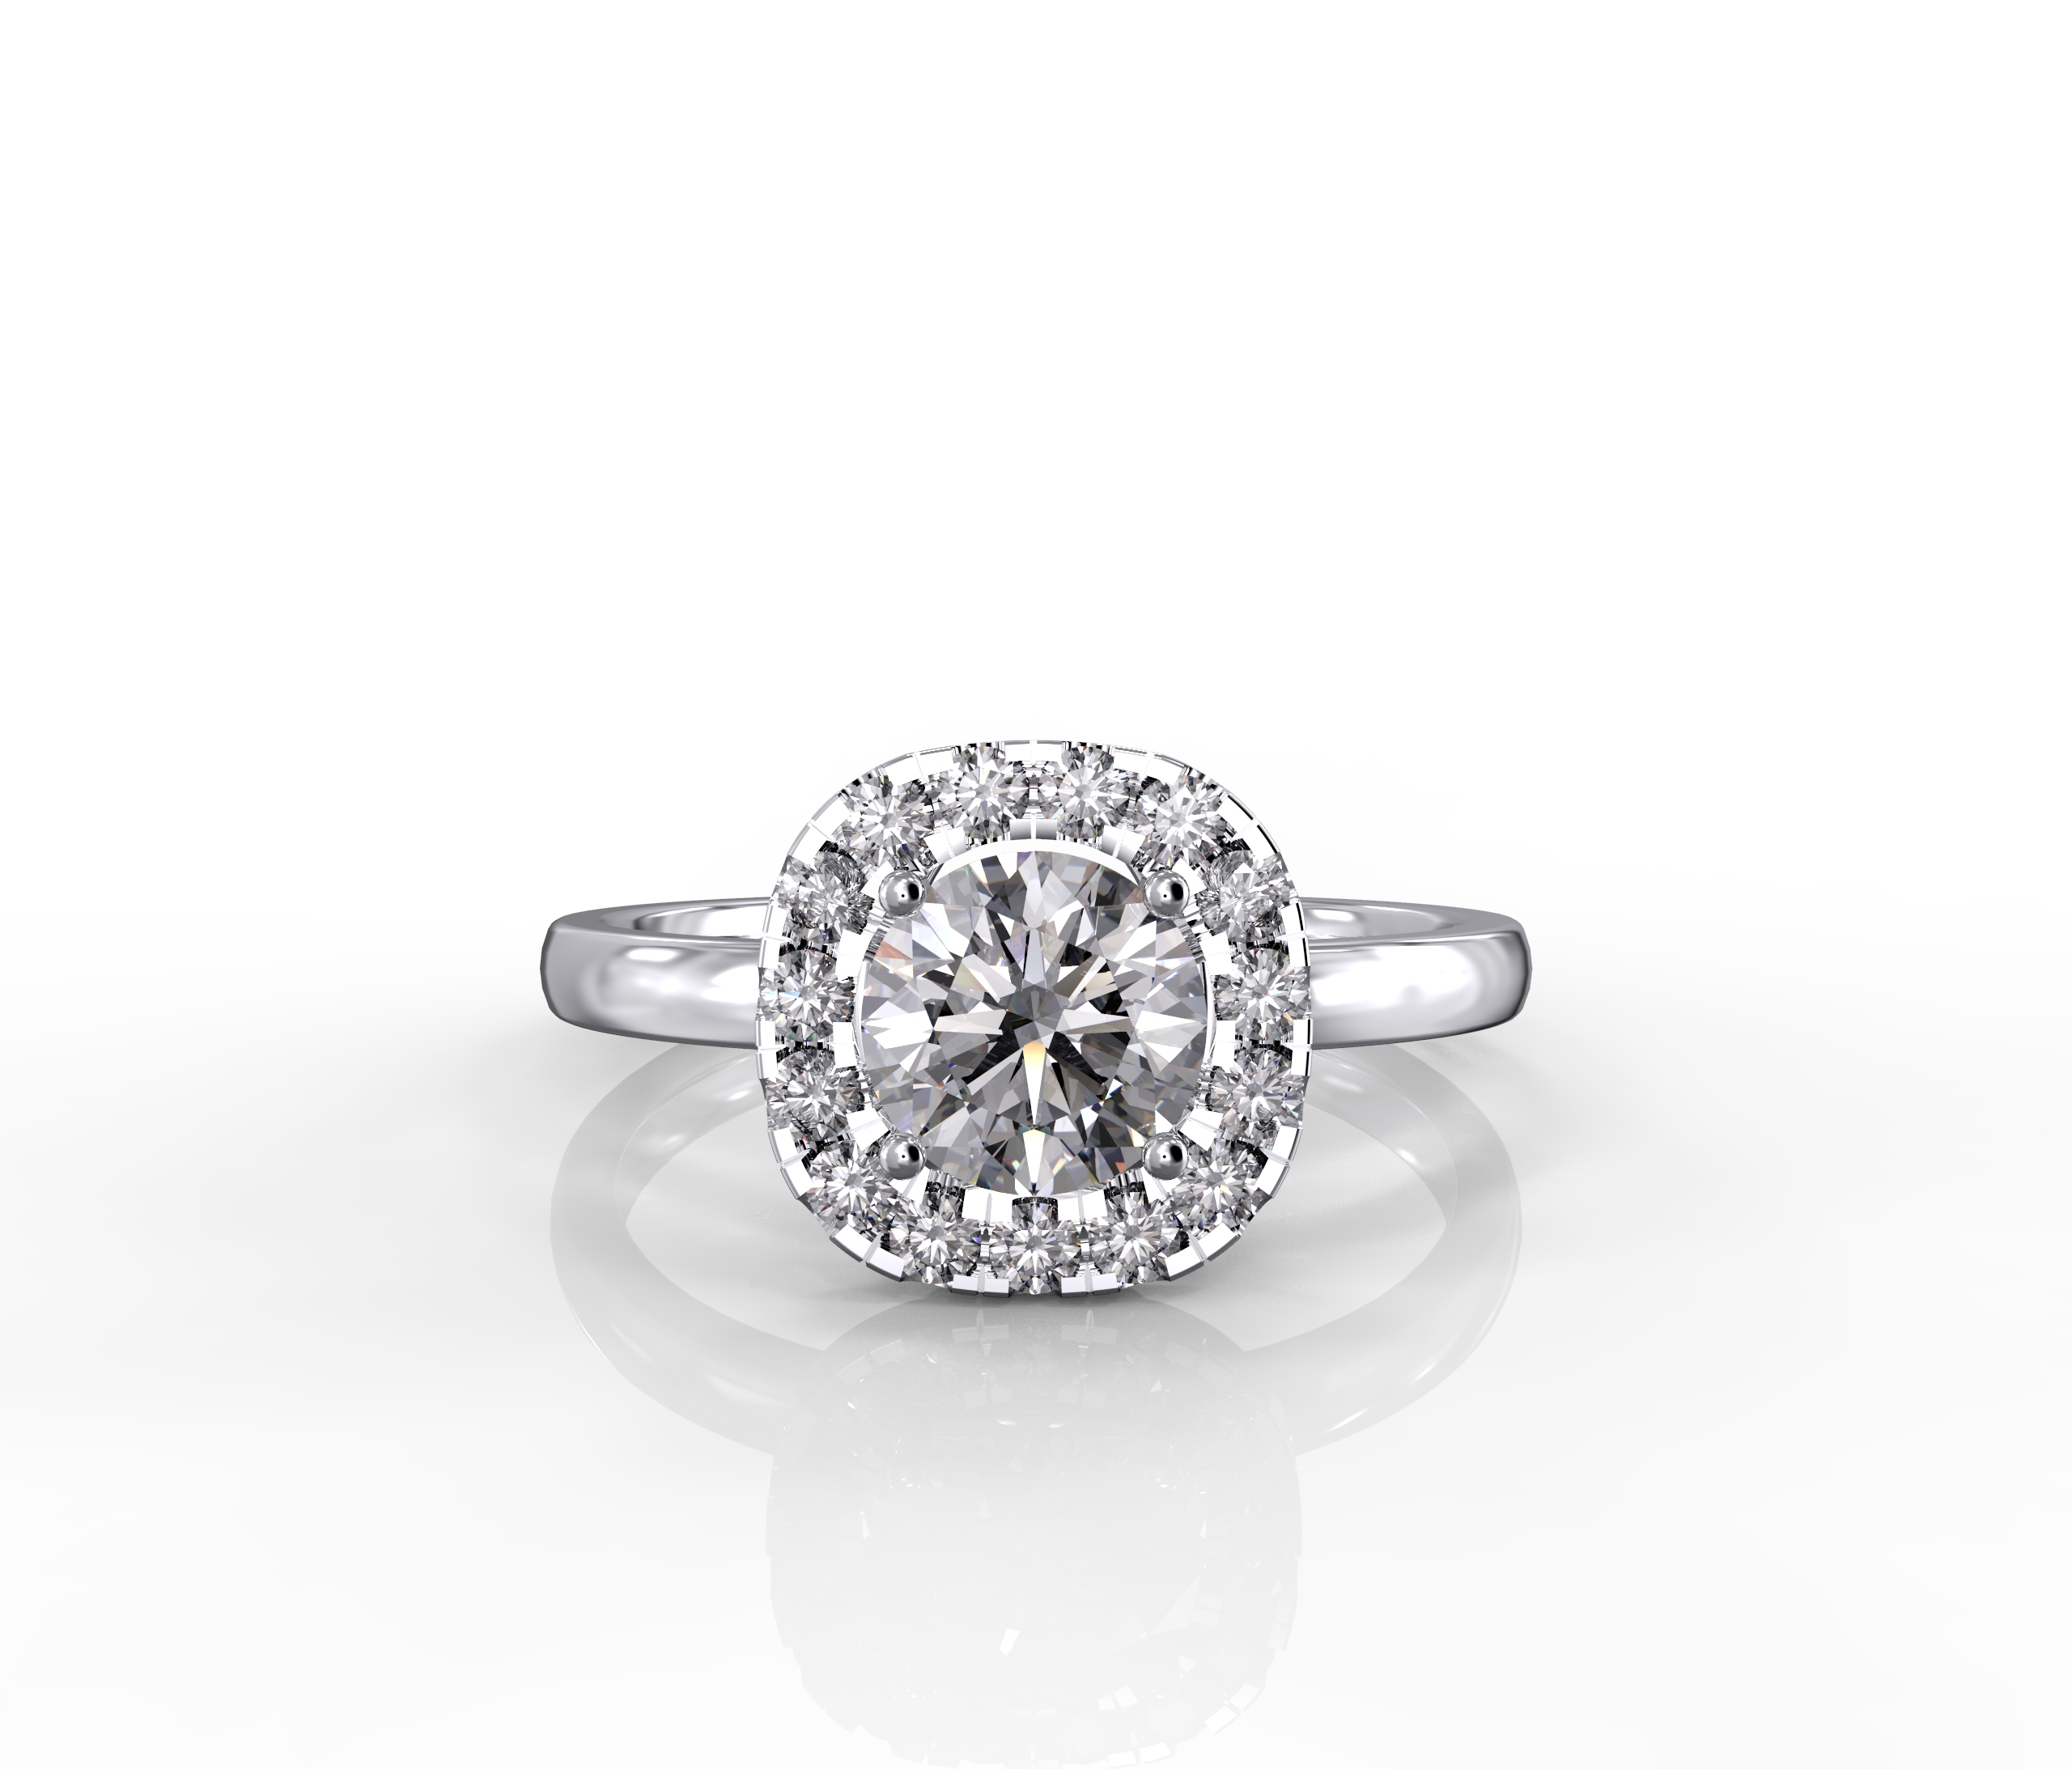 Front view of Halo Cushion Diamond Ring